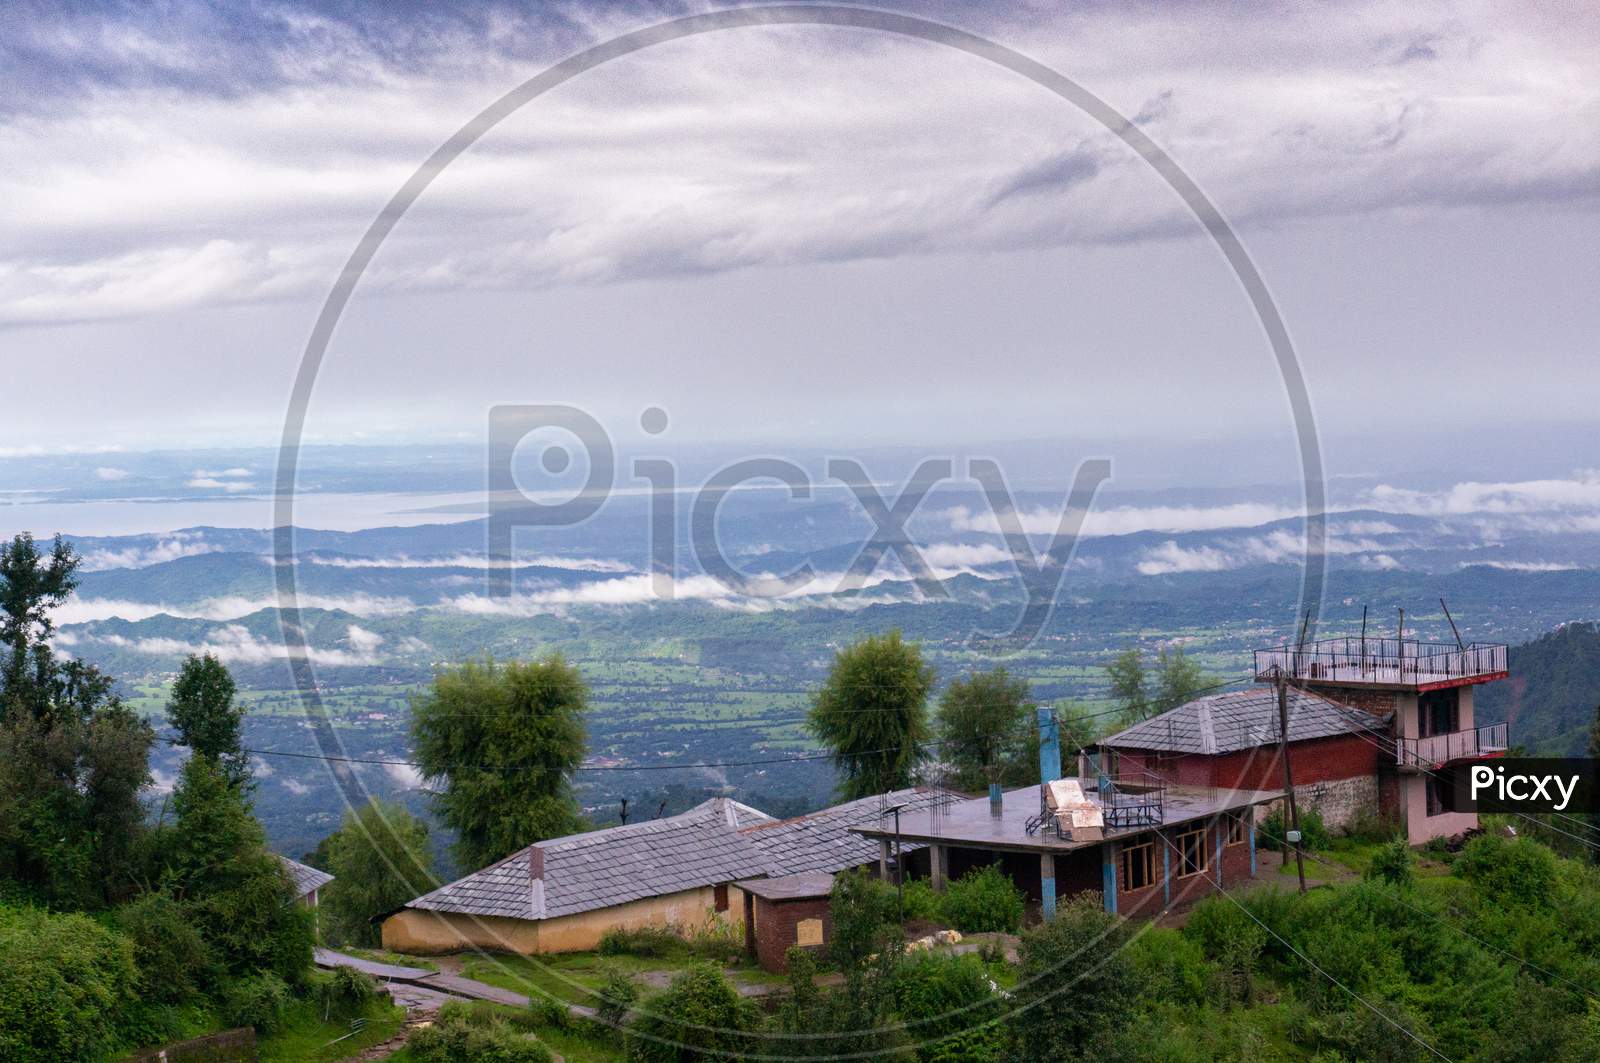 Building Perched On The Edge Of A Mountain With Trees All Around Looking Over A Beautiful Vista Landscape Of A Valley Covered In Clouds At Dawn Shot In Mcleodganj Of Dharamshala Valley In Himachal Pradesh In India A Popular Tourist And Homestay Destination